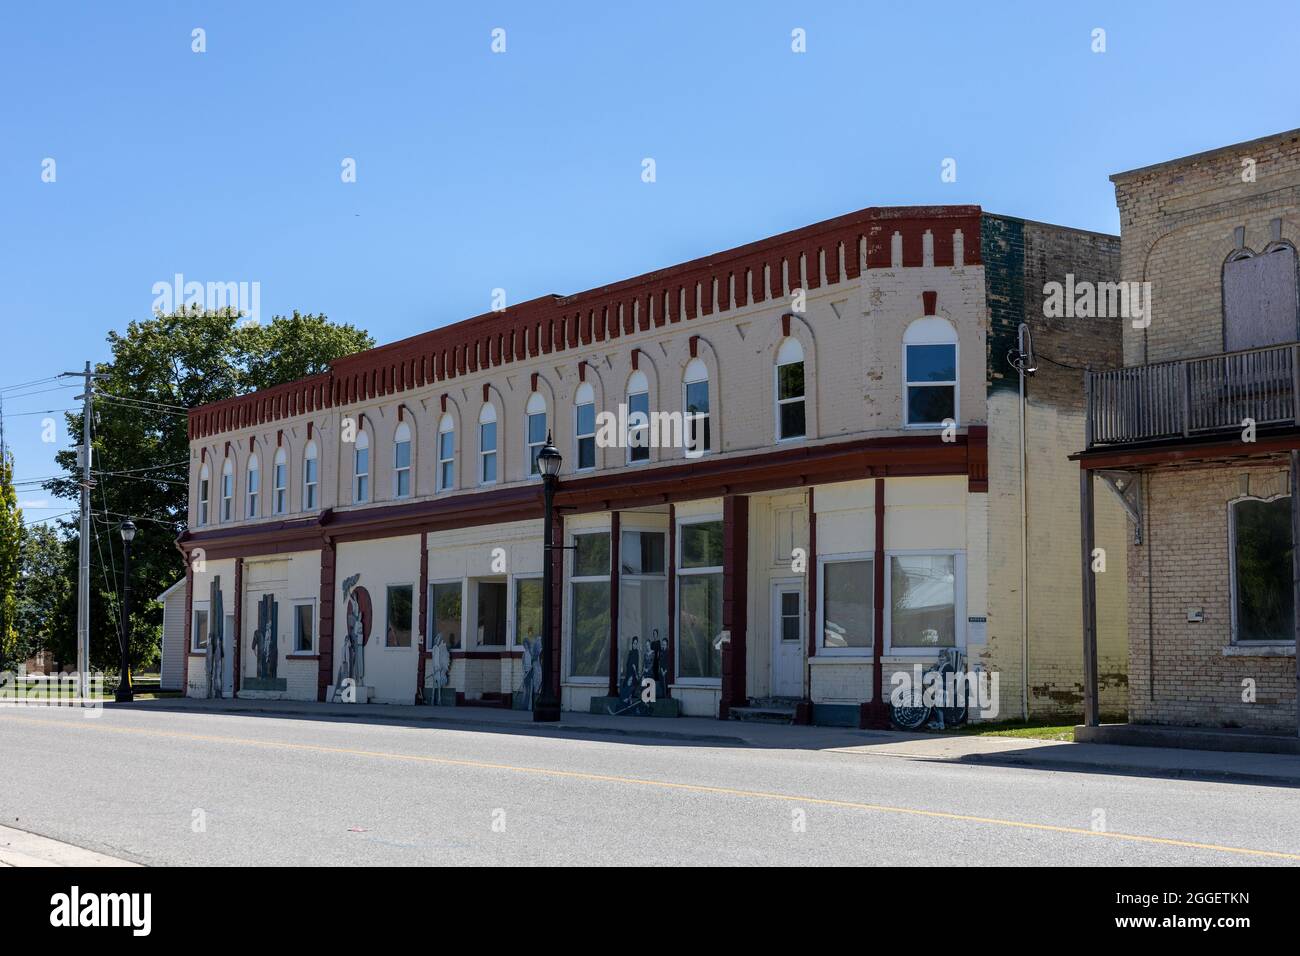 Historic Building In Ripley Ontario With Historic Photographs Of Women From Ripley Stock Photo